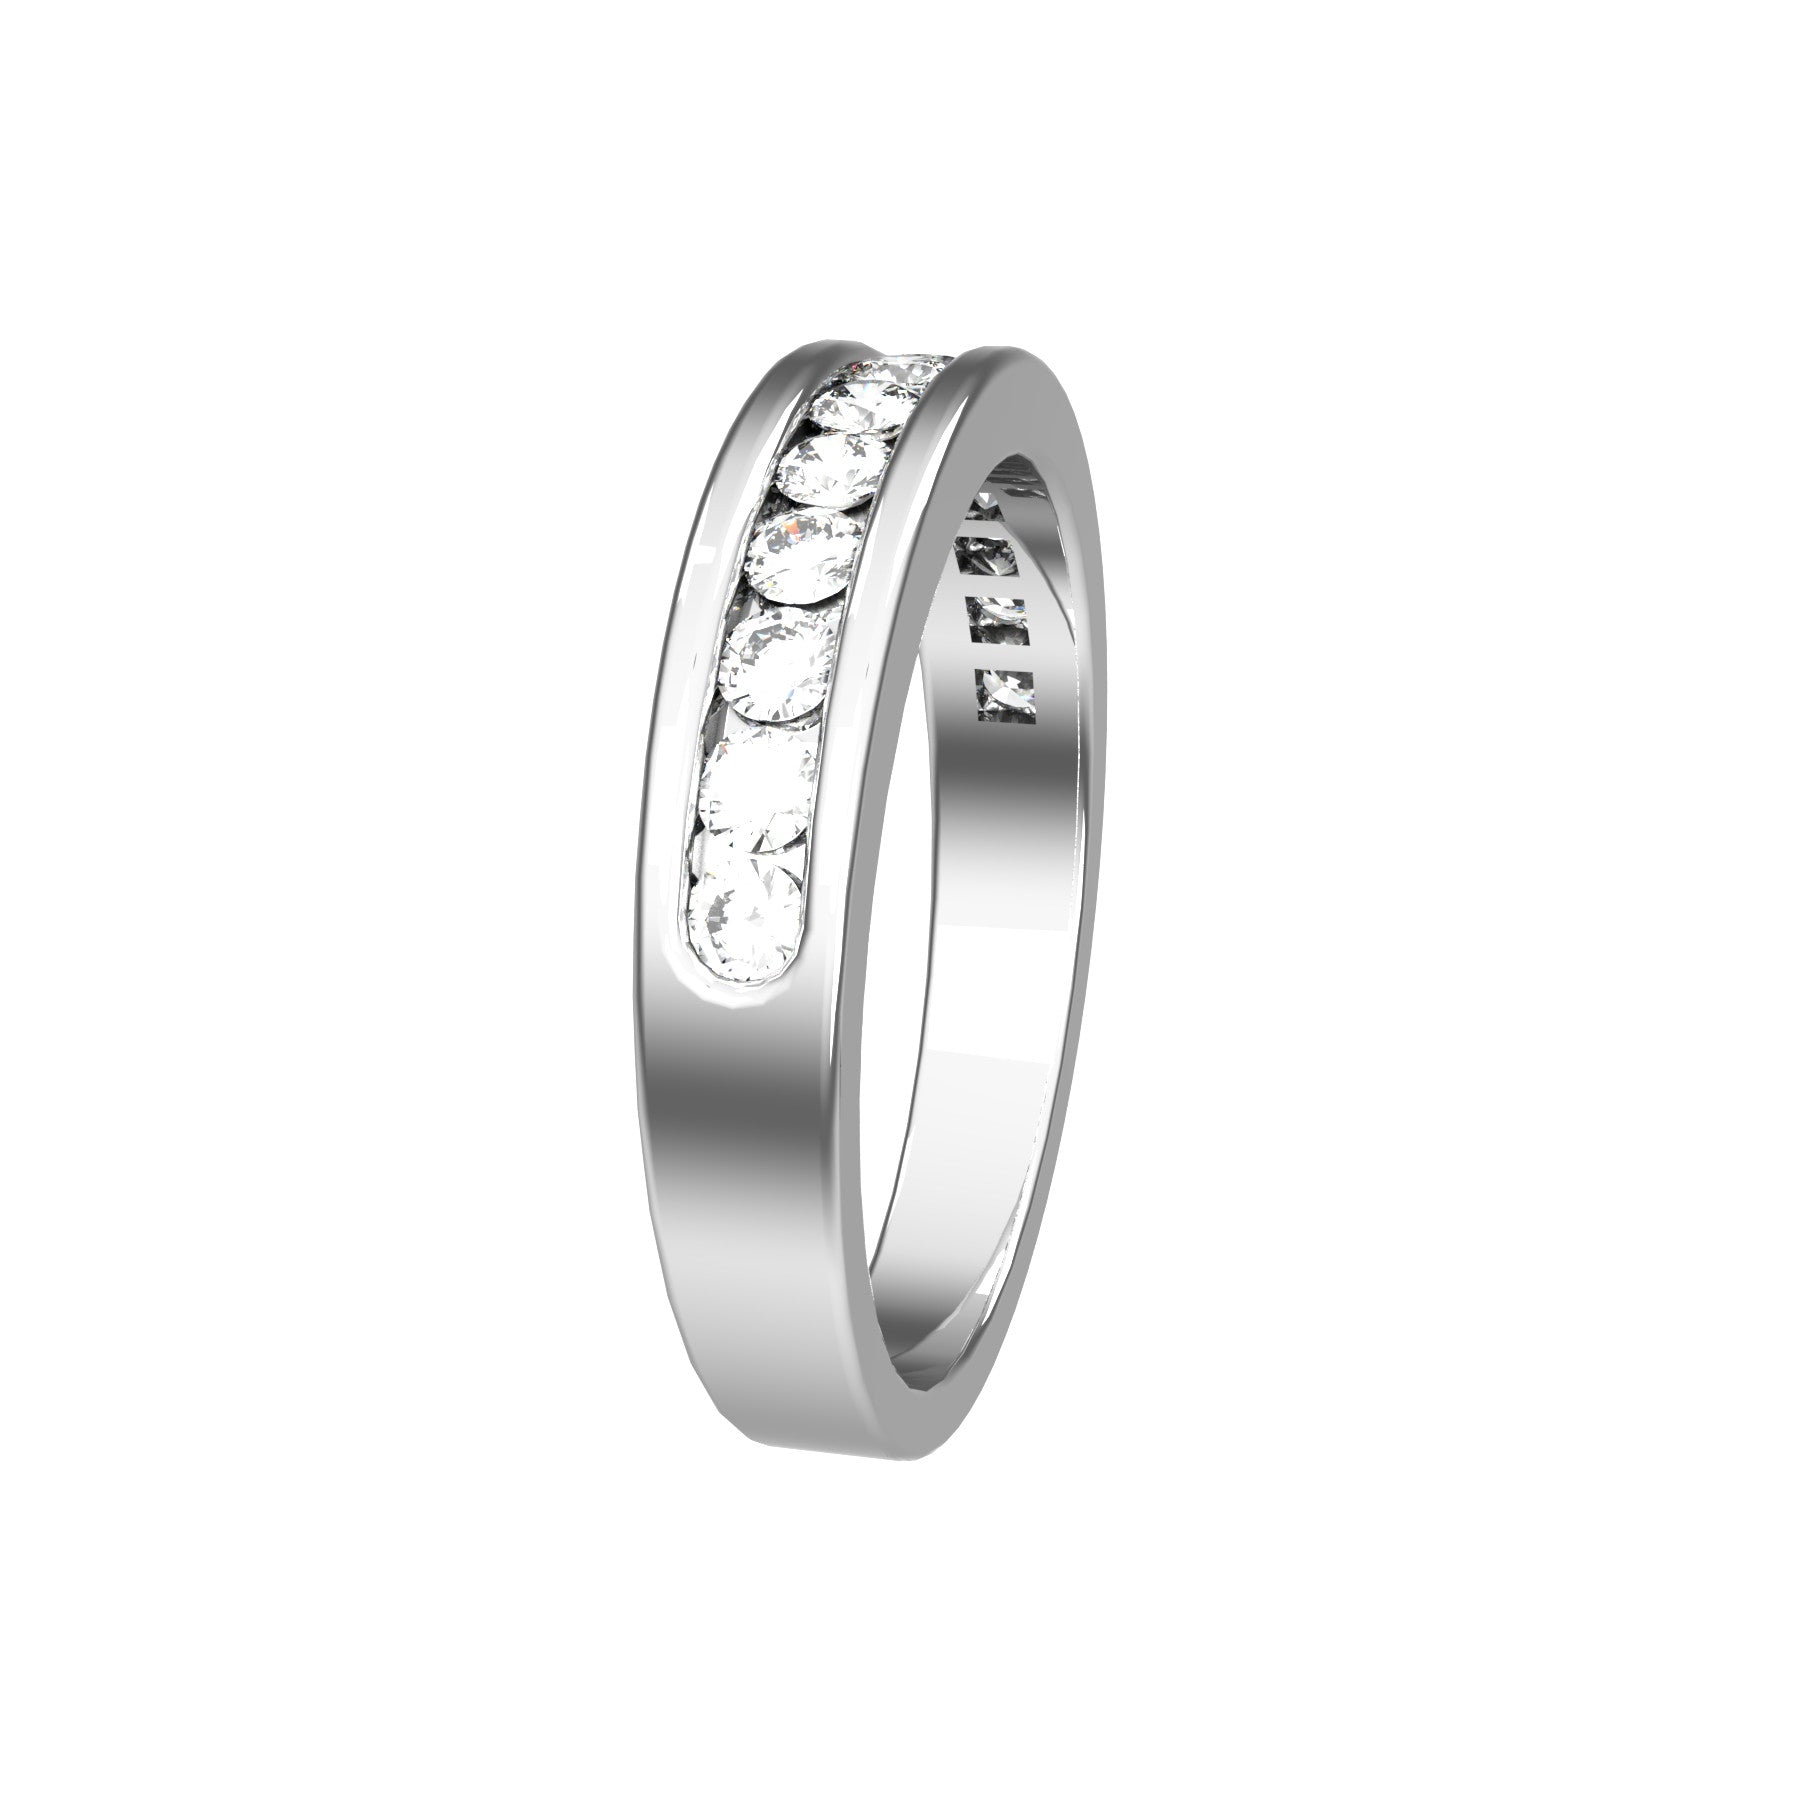 perpetual half wedding ring, 18 K white gold, 0,03 ct round natural diamond, weight about 3,8 g. (0.13 oz), width 4,00 mm